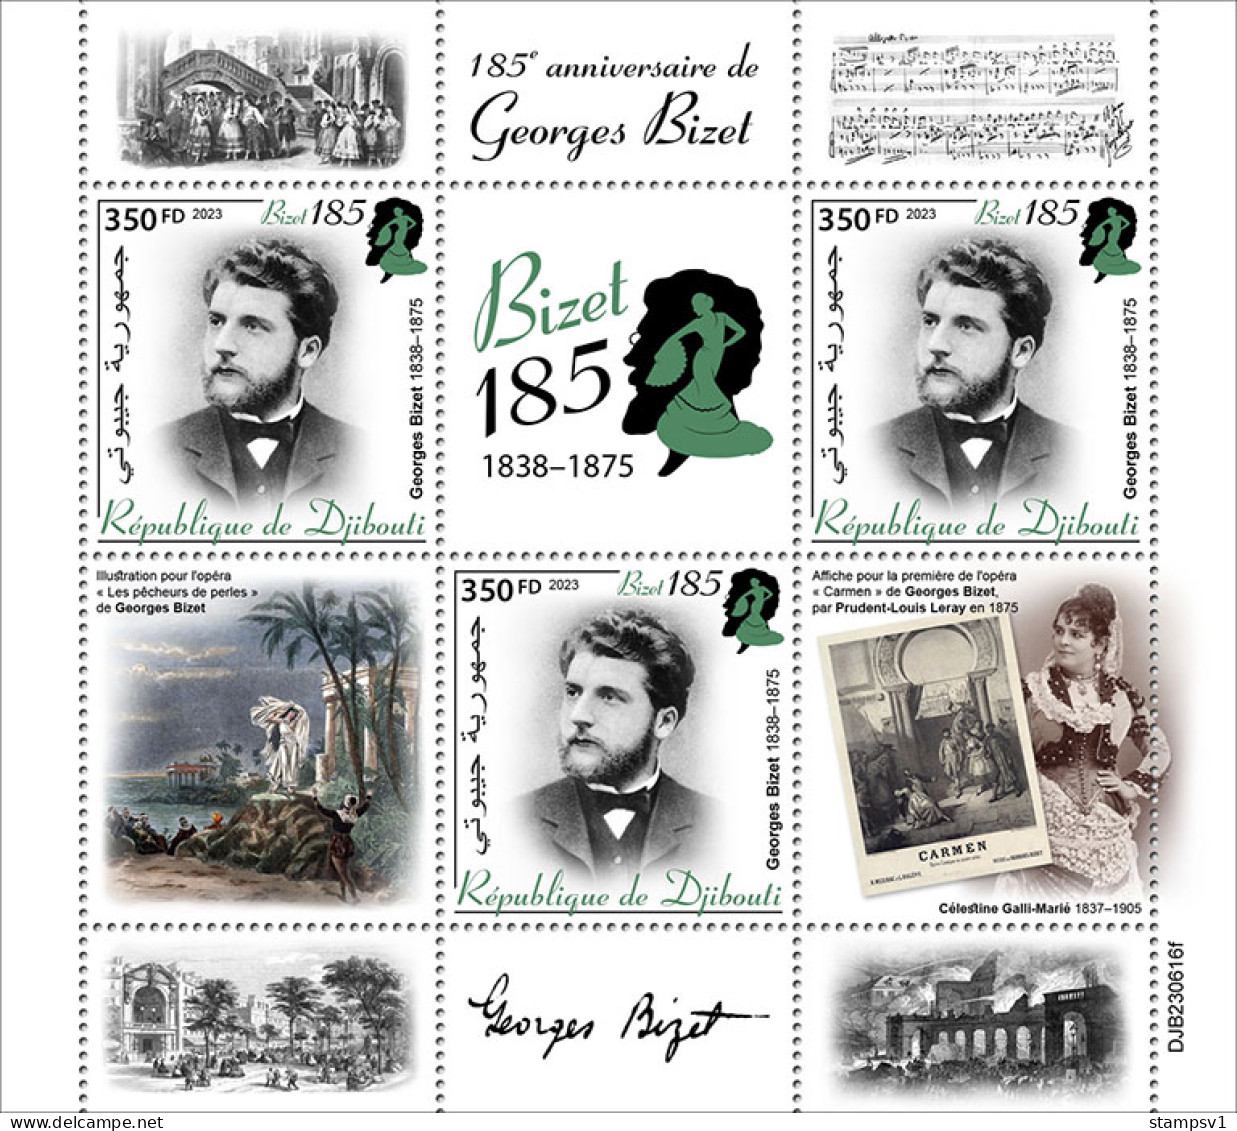 Djibouti 2023 185th Anniversary Of Georges Bizet.  (616) OFFICIAL ISSUE - Musique